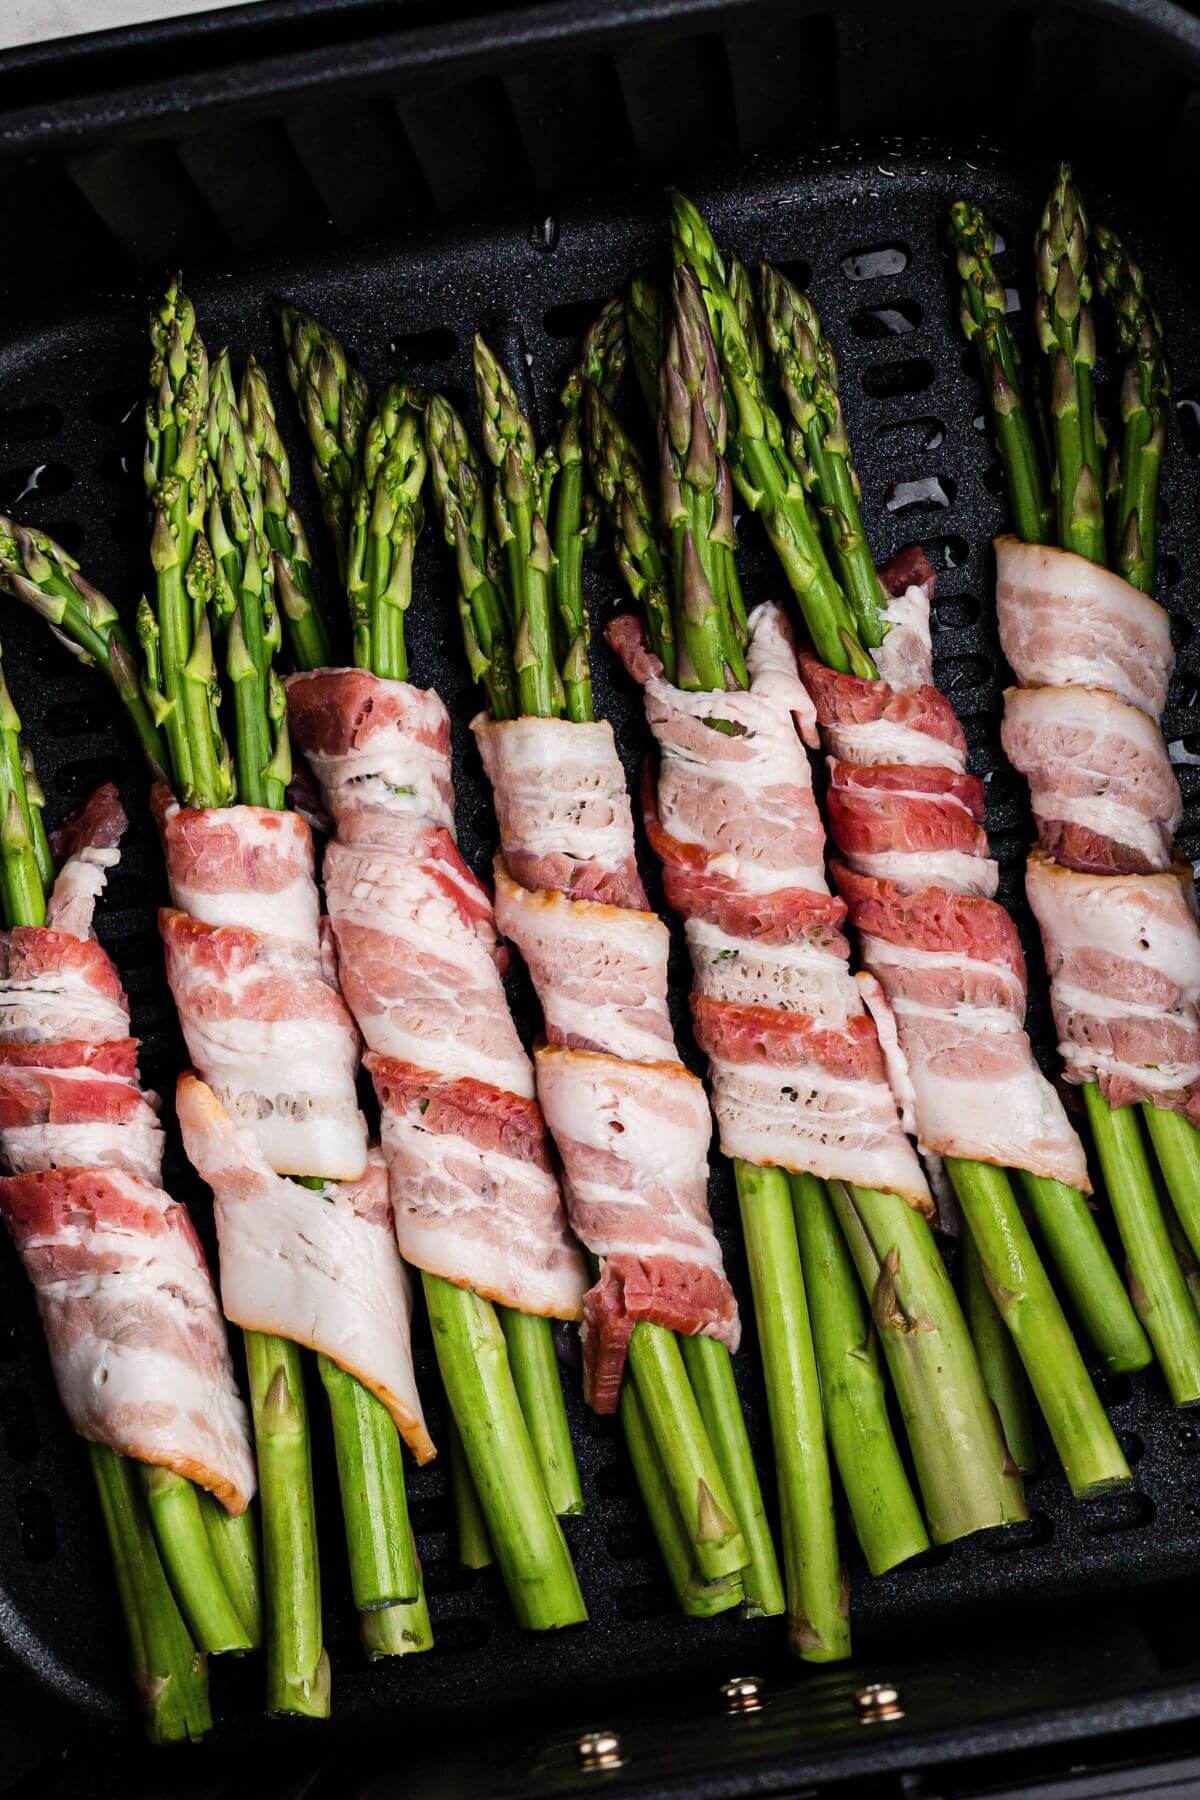 Uncooked bacon wrapped around uncooked asparagus spears in the air fryer basket. 